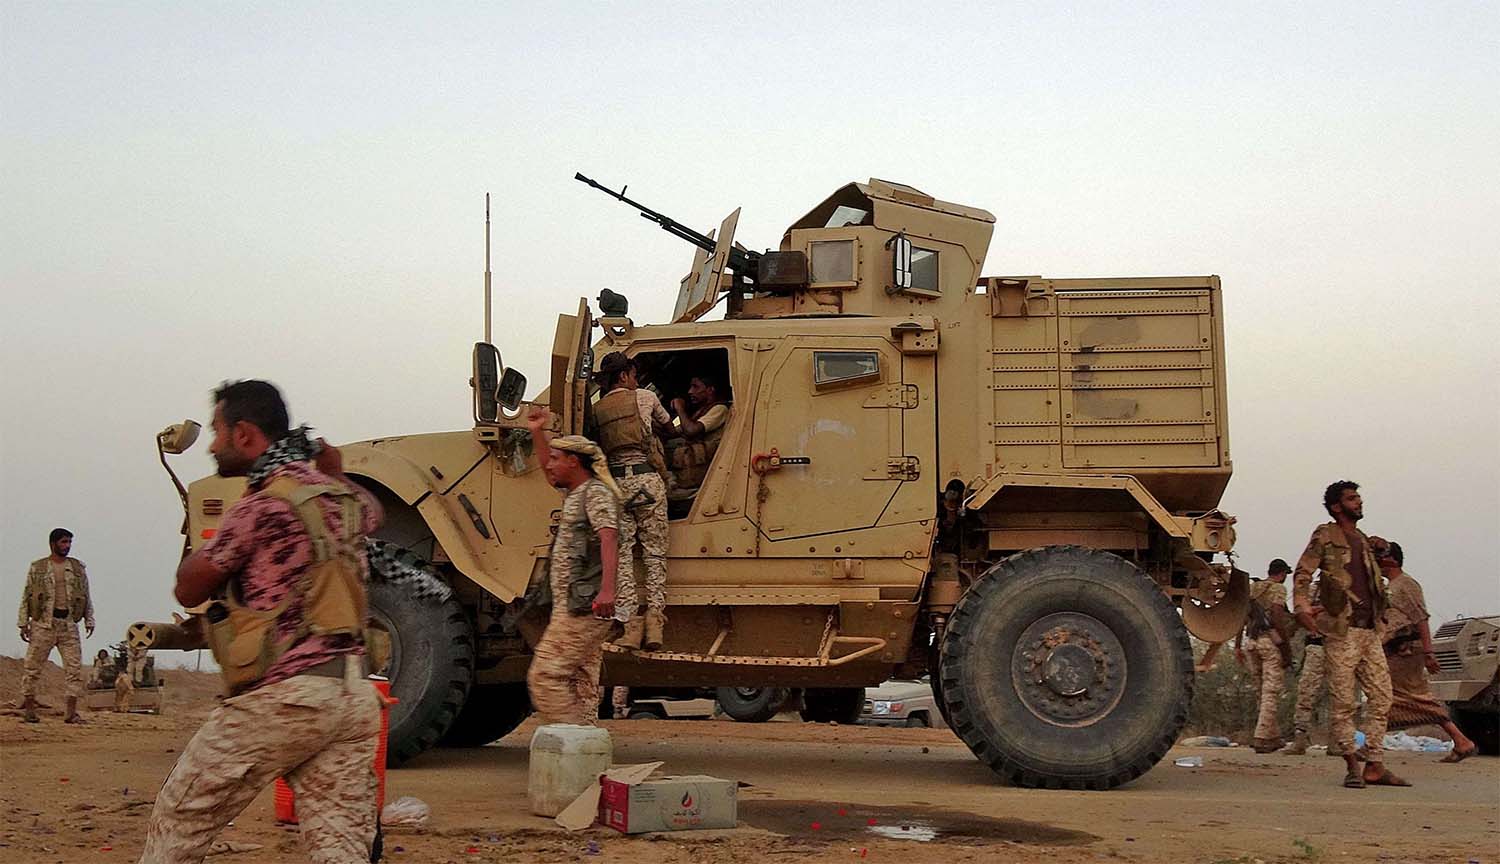 Forces loyal to Yemeni government